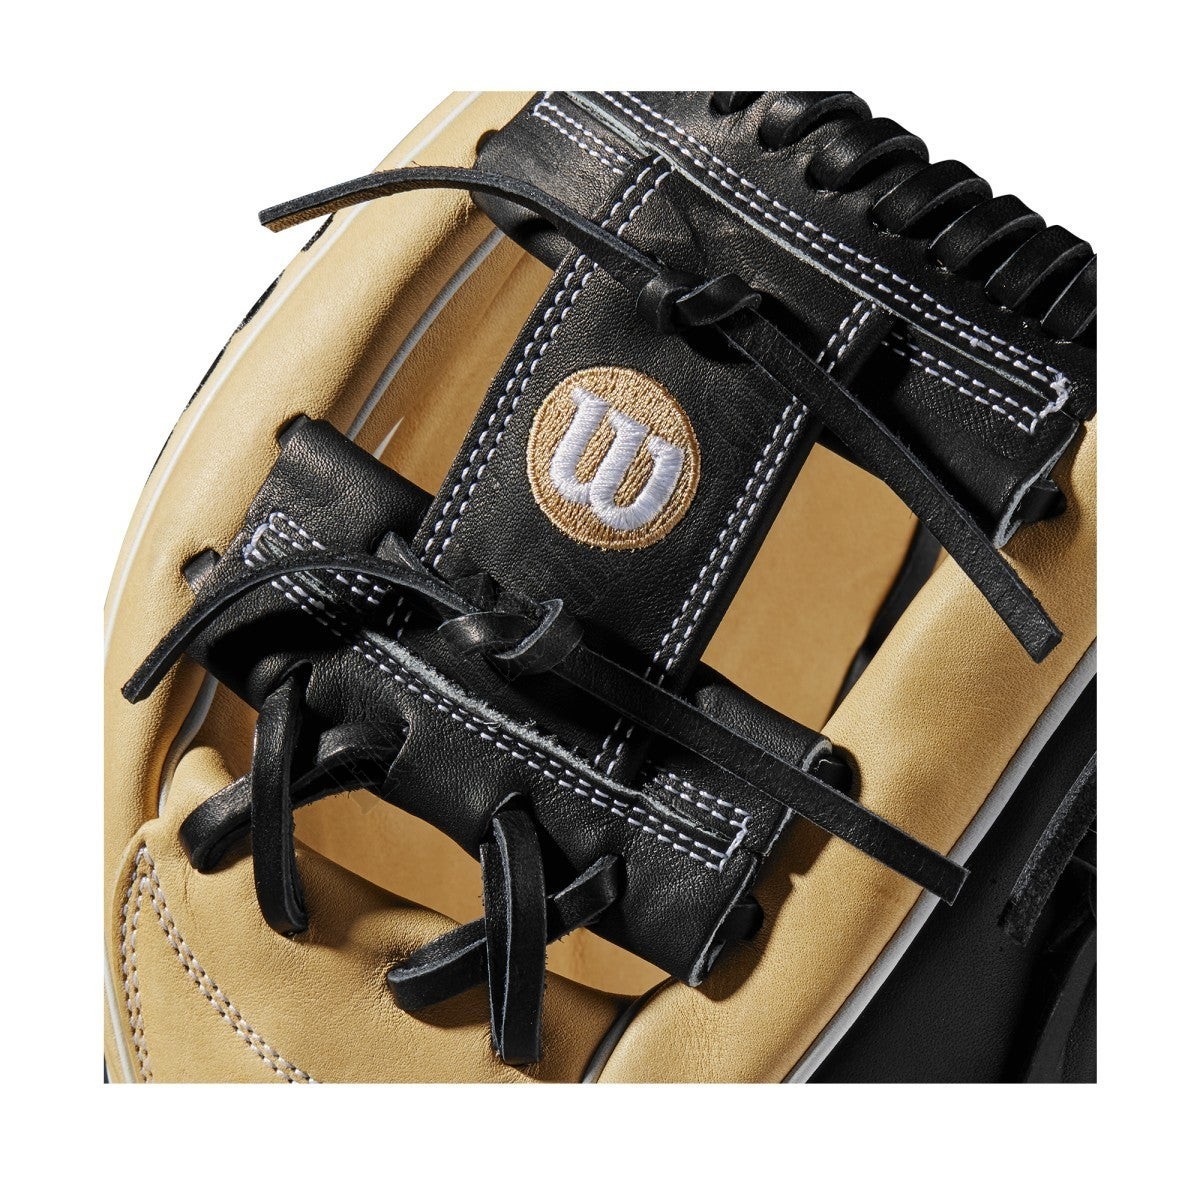 2019 A2000 1787 11.75" Infield Baseball Glove - Right Hand Throw ● Wilson Promotions - -5